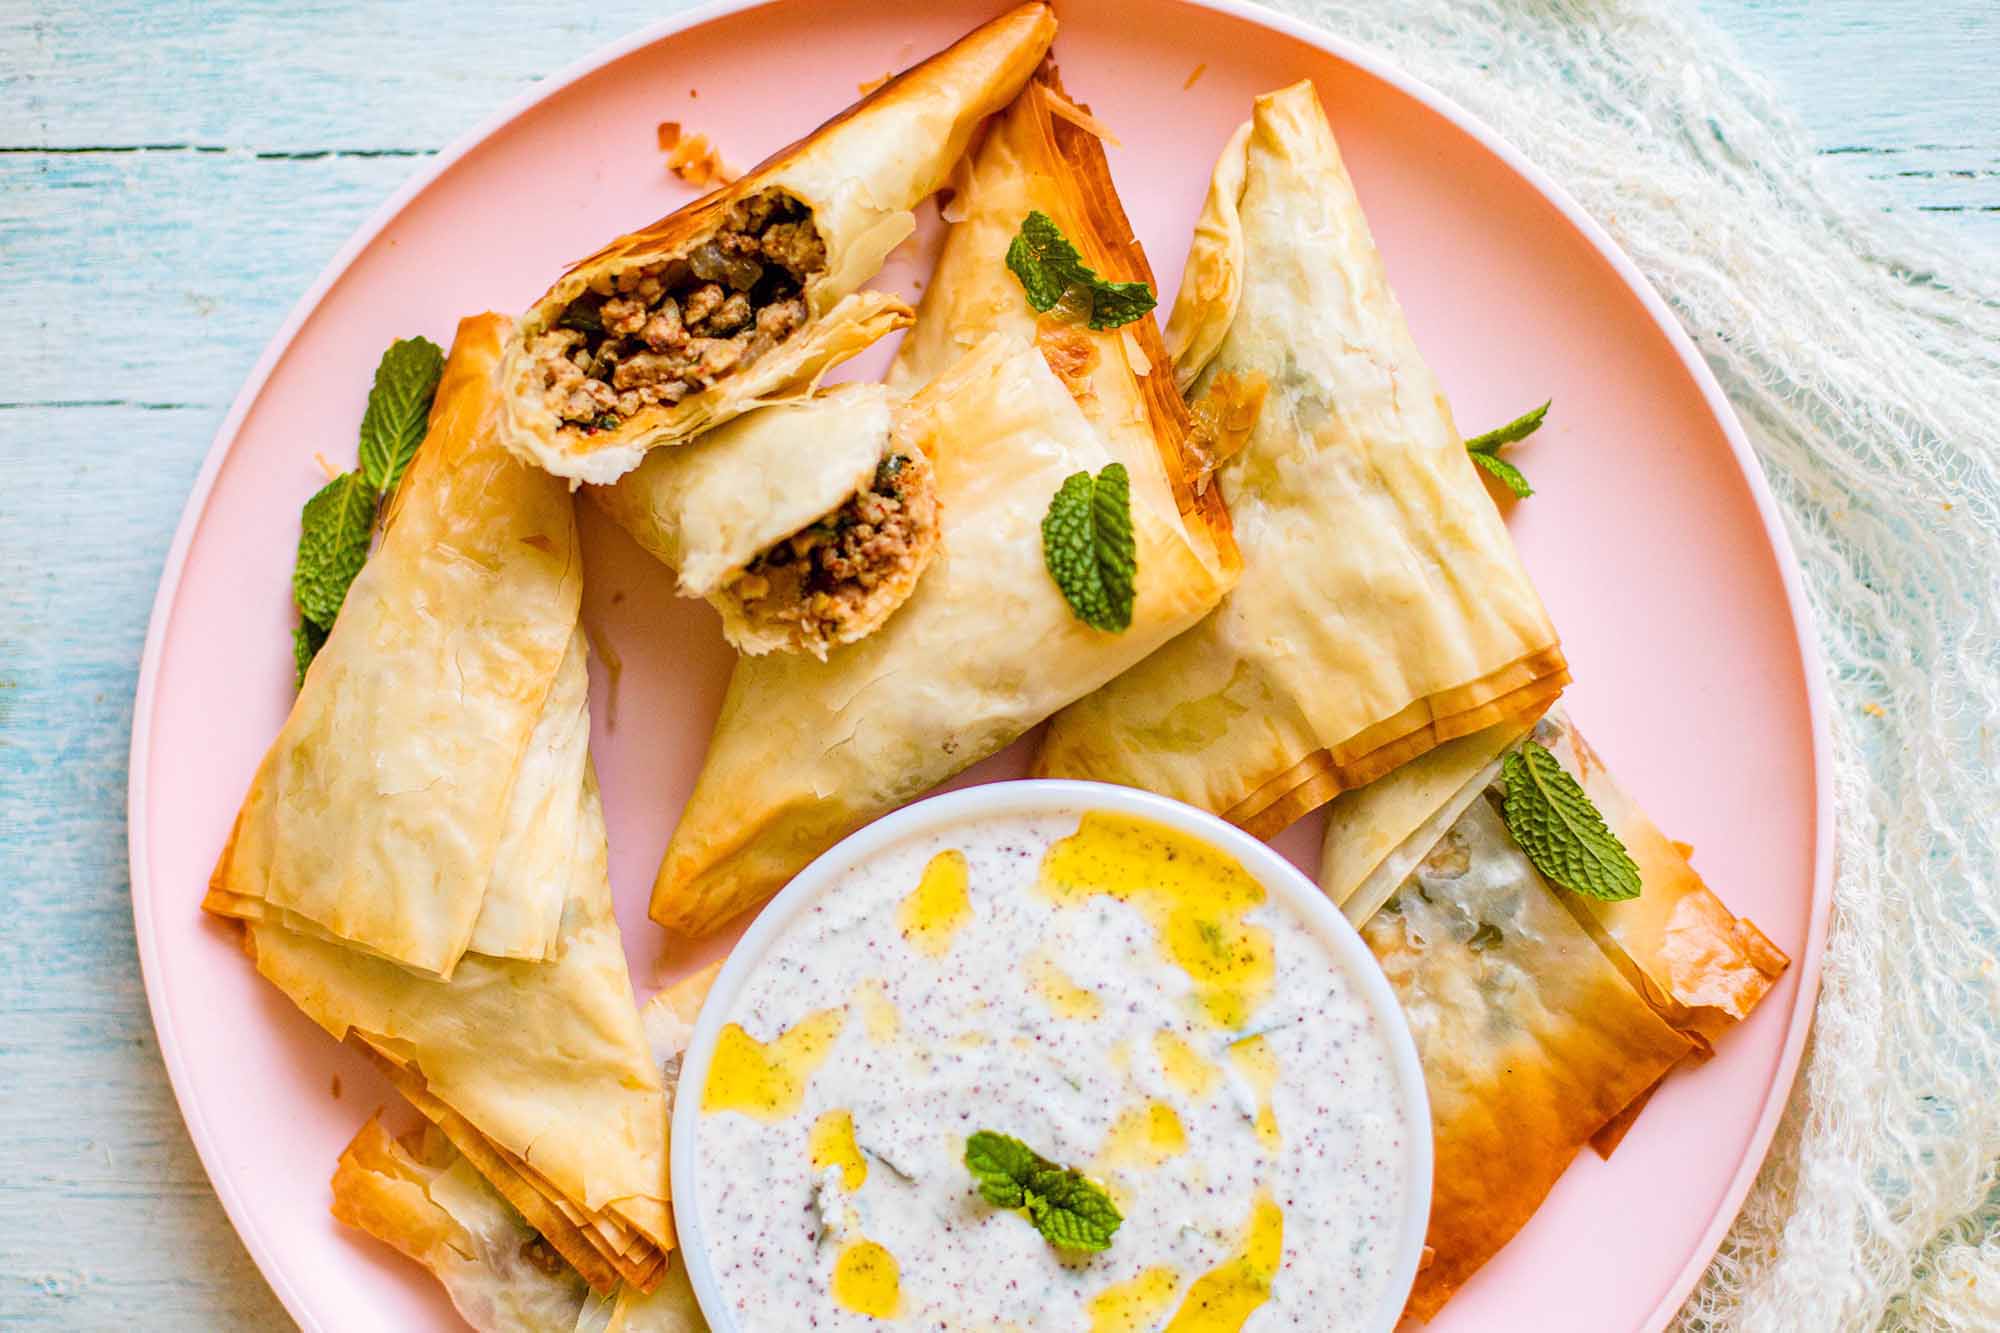 Easy Baked Indian Chicken Tikki Masala Samosa folded into a triangle with Mint Yogurt Dip on a pink plate with one samosa broken open.